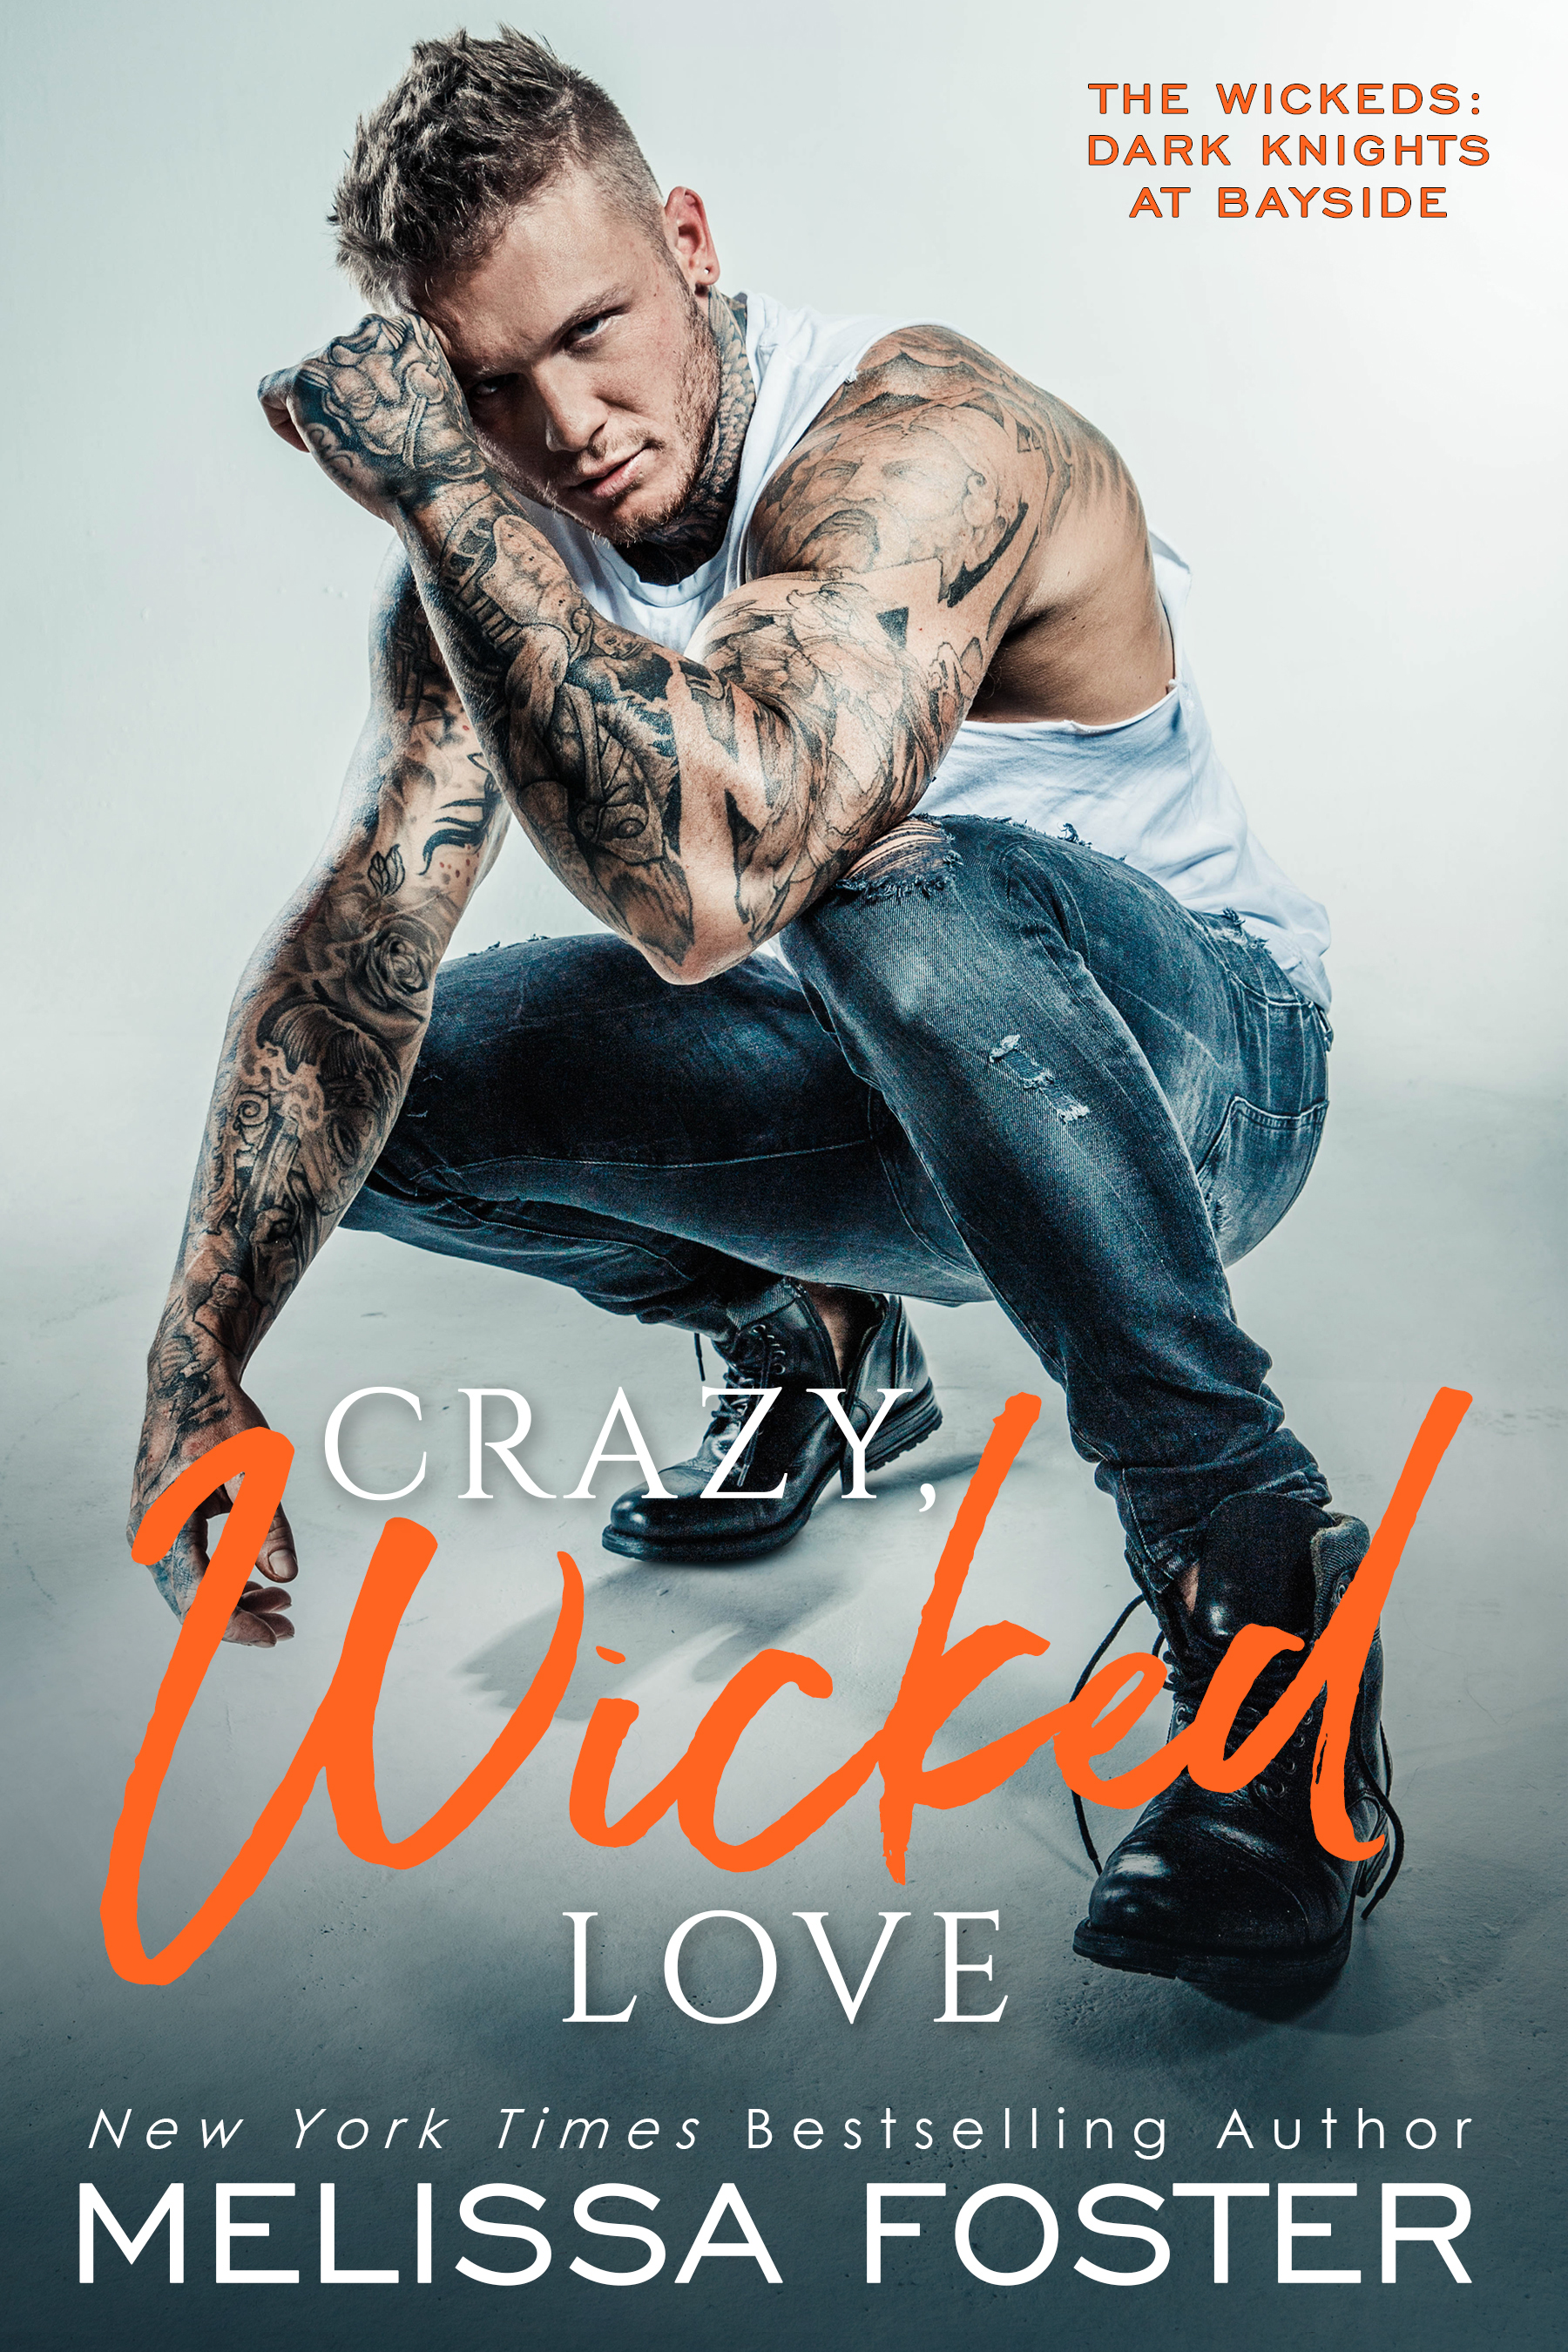 Cover Image of Crazy, Wicked Love (The Wickeds: Dark Knights at Bayside Book 3)